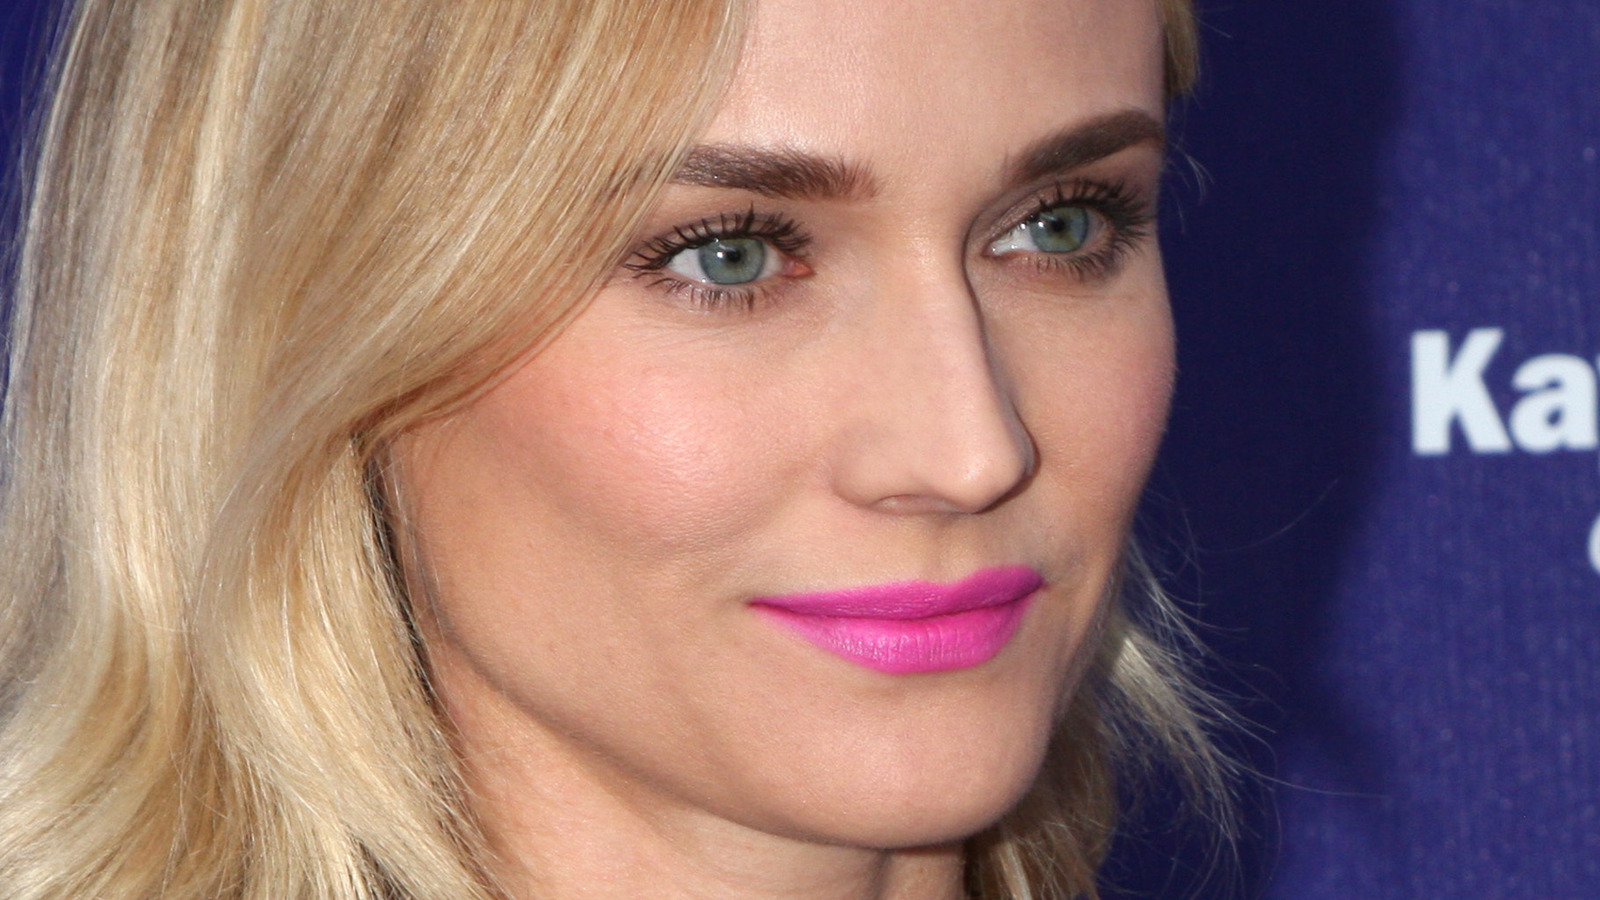 Diane Kruger's complex relationship with Quentin Tarantino: Explained